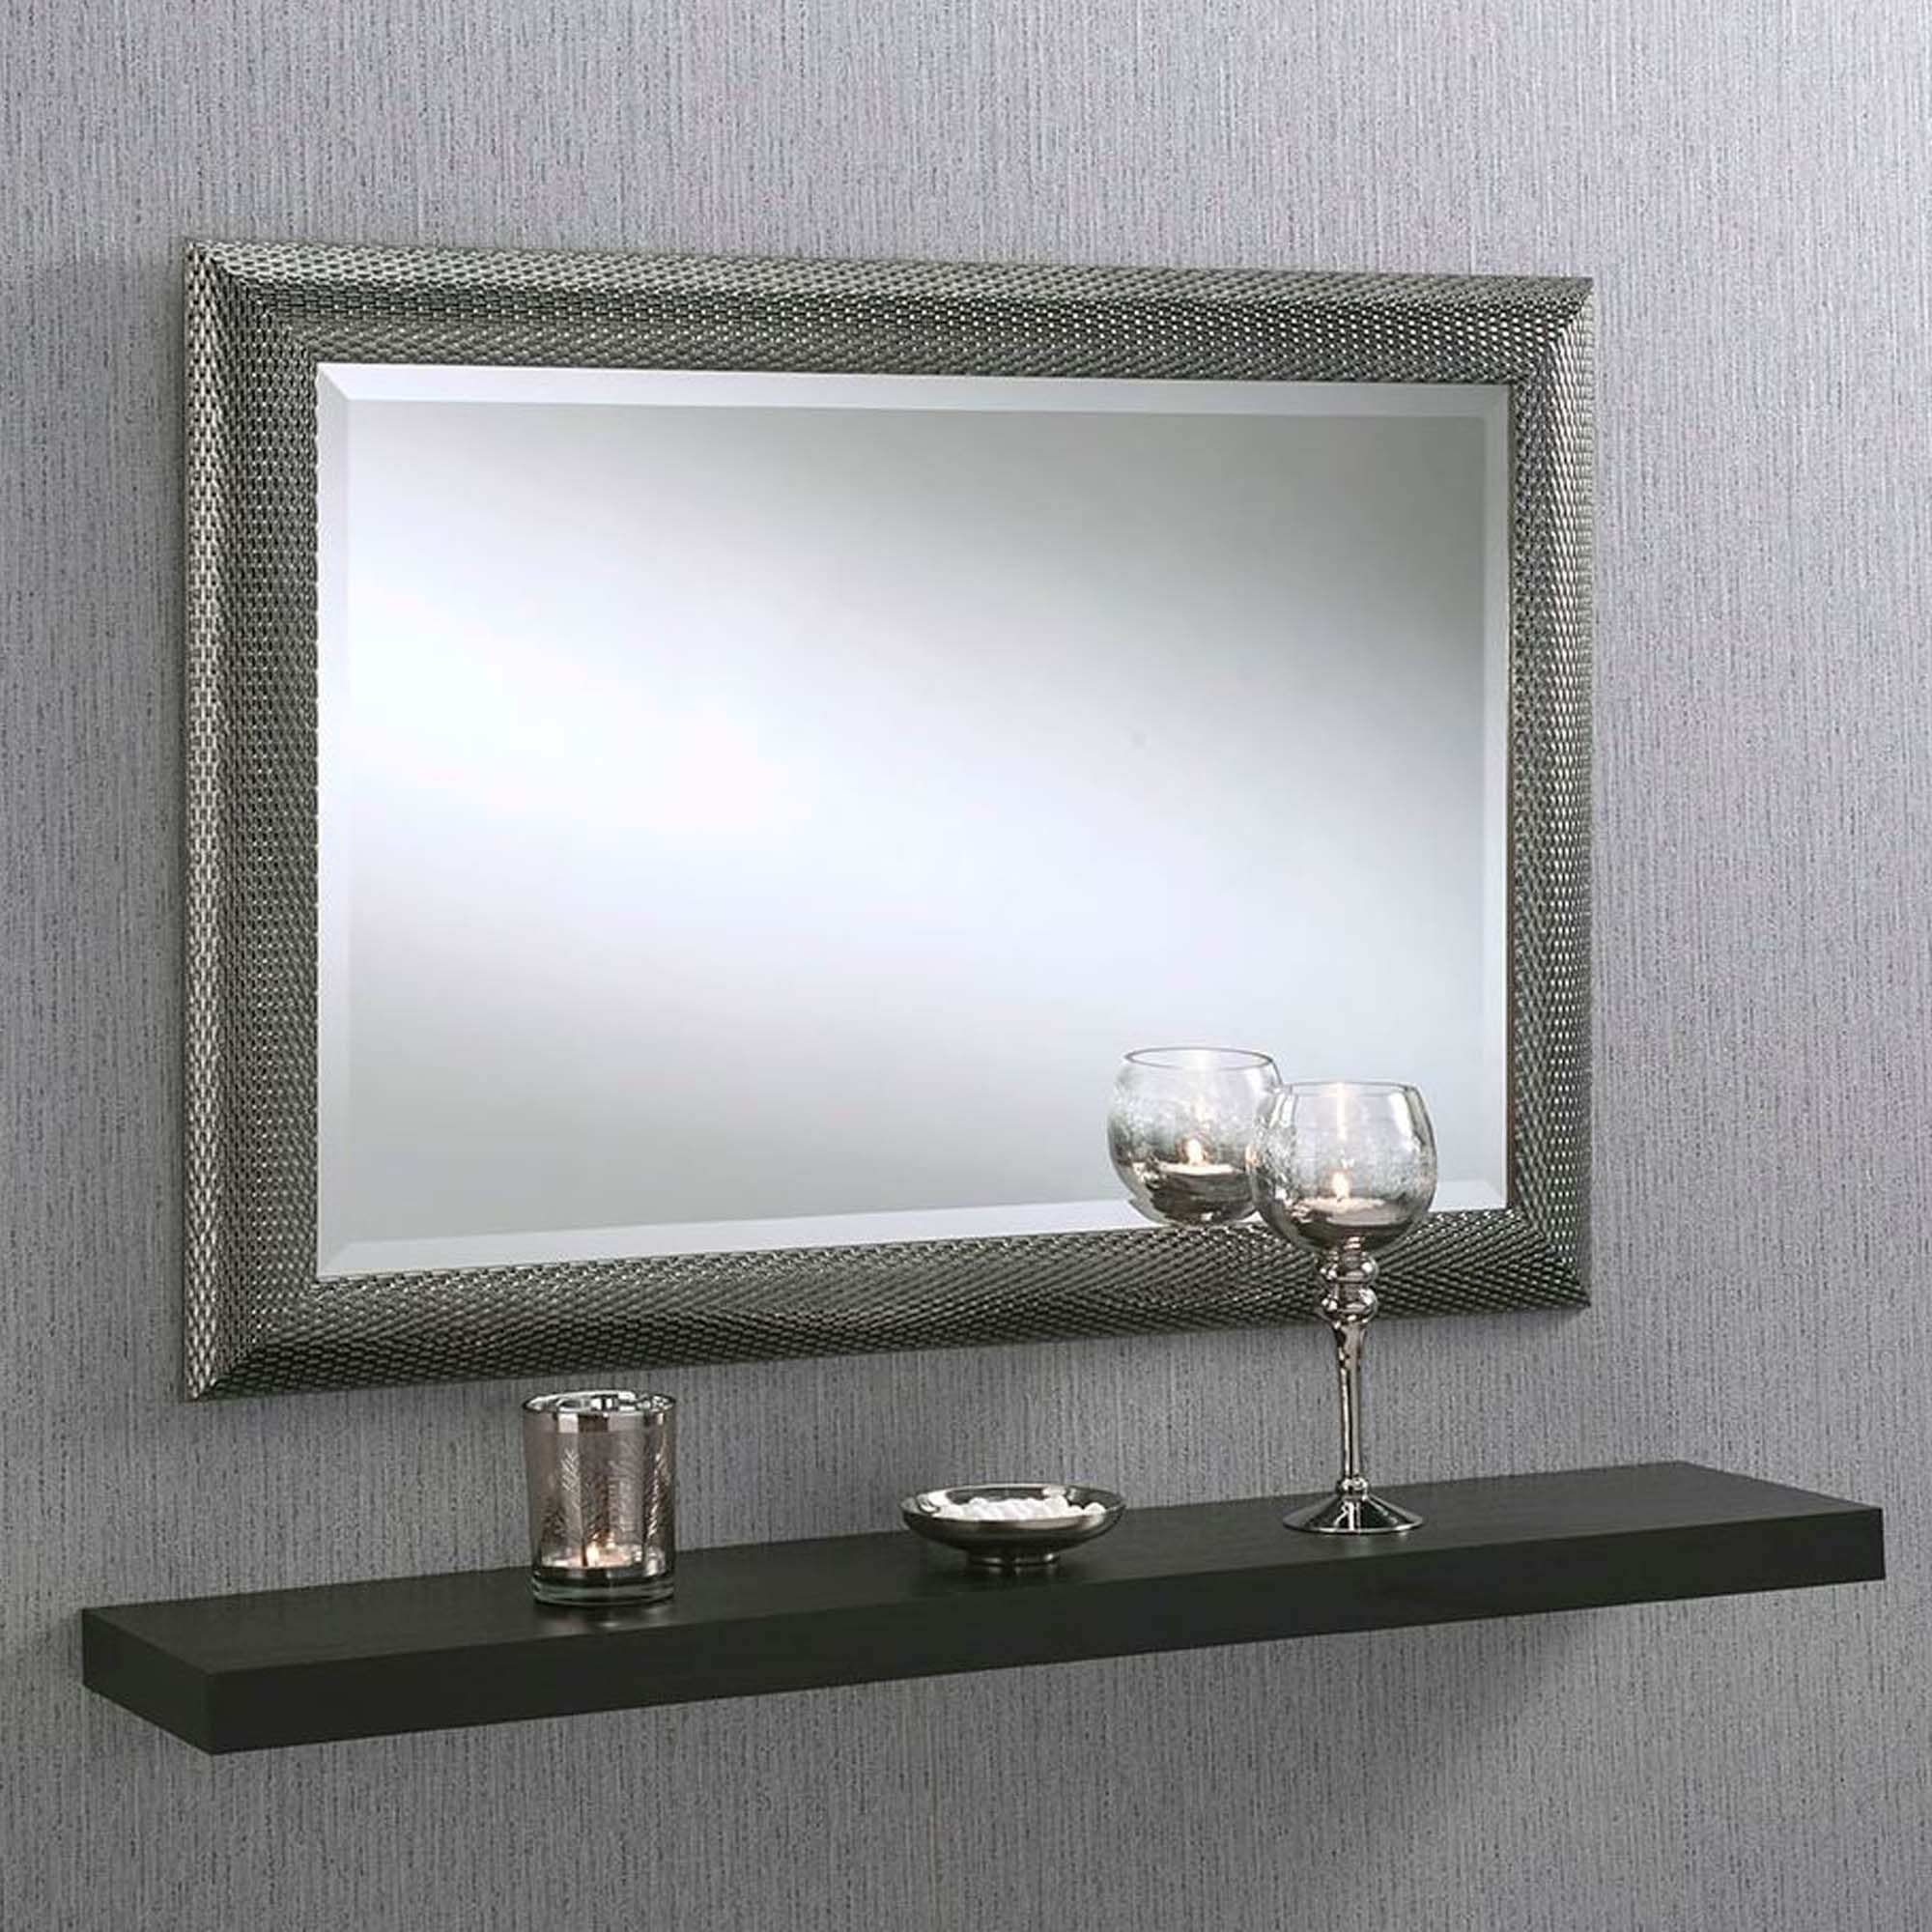 Dimple Effect Grey Rectangular Wall Mirror | Homesdirect365 Throughout Gray Wall Mirrors (View 2 of 15)